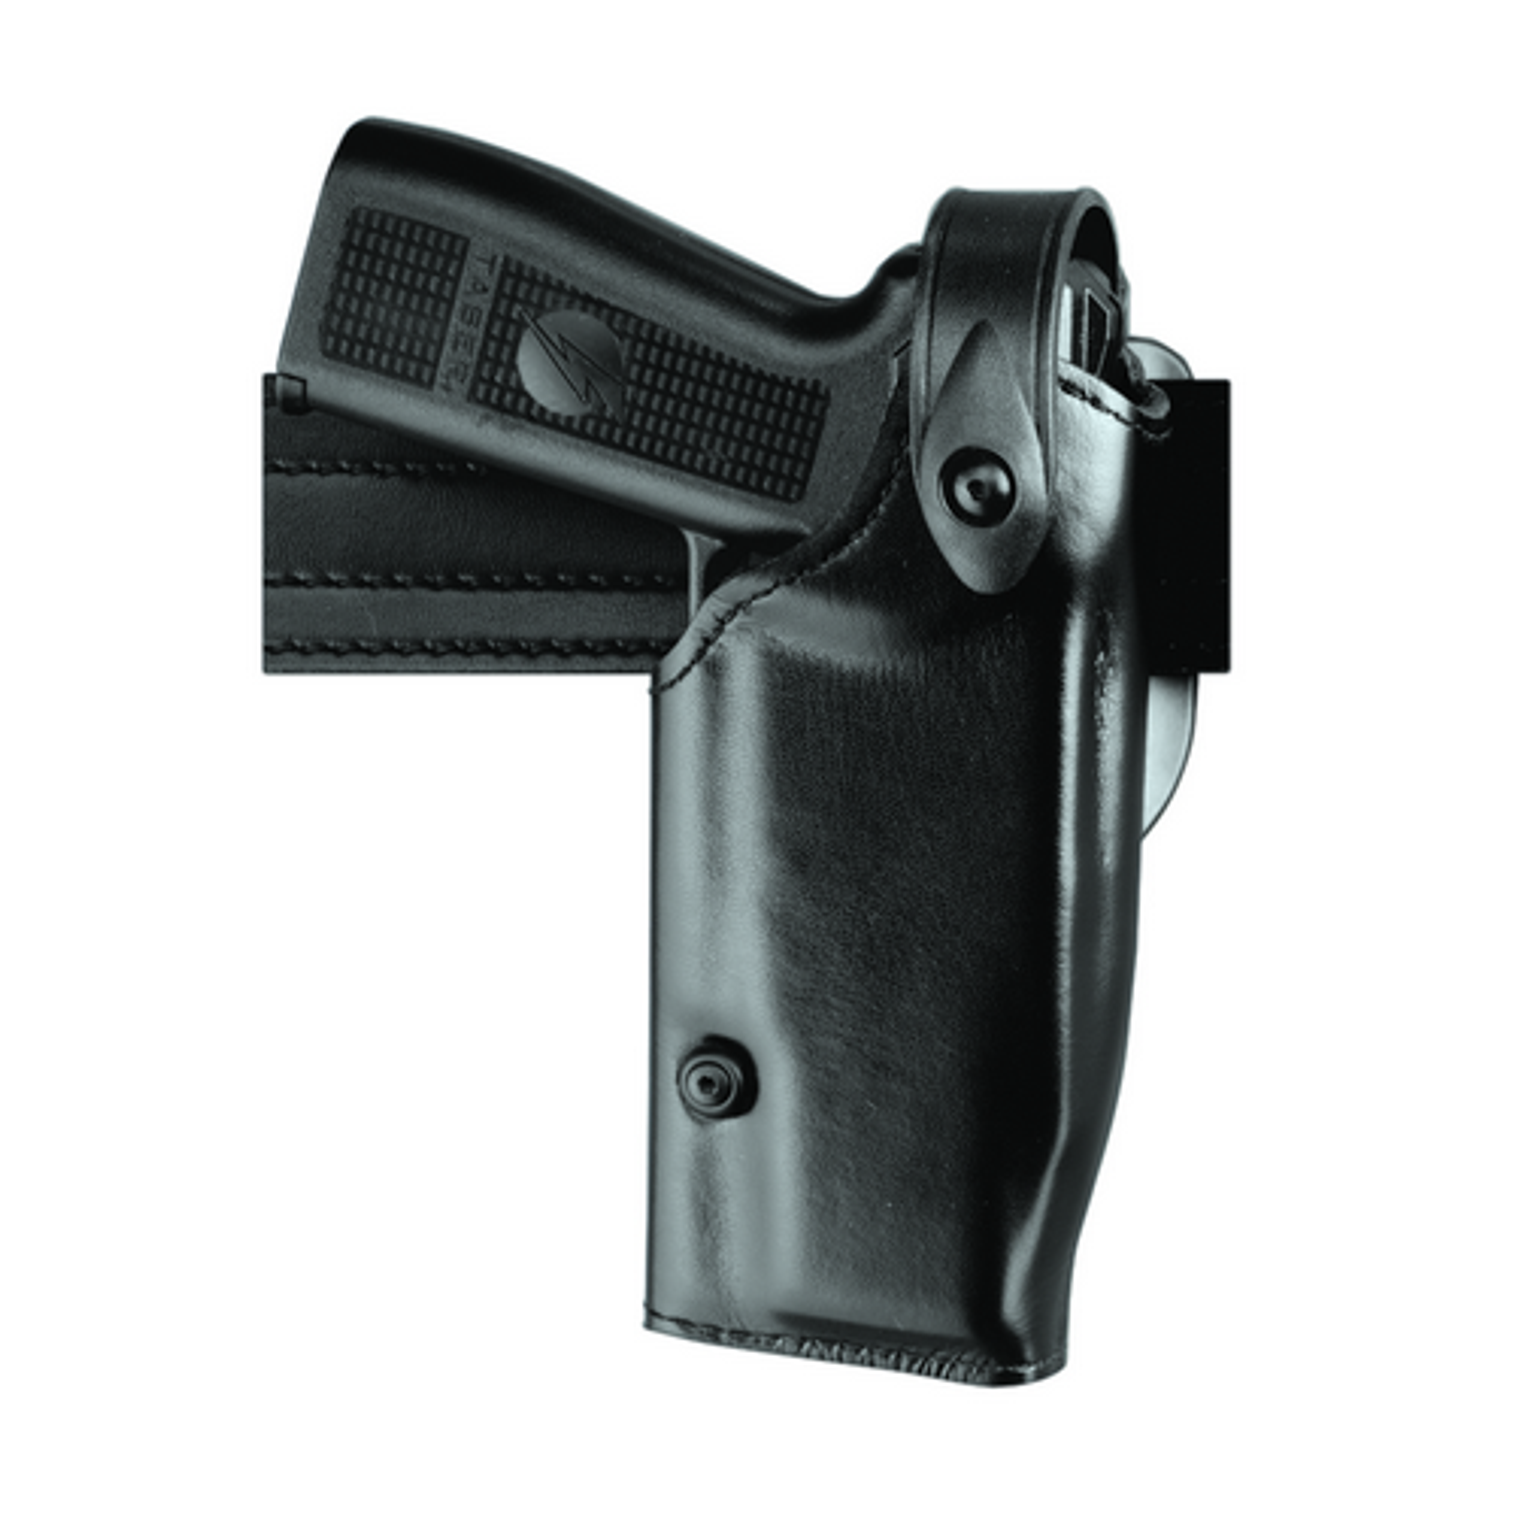 Model 6280 Sls Mid-ride Level Ii Retention Duty Holster For Sig Sauer P220